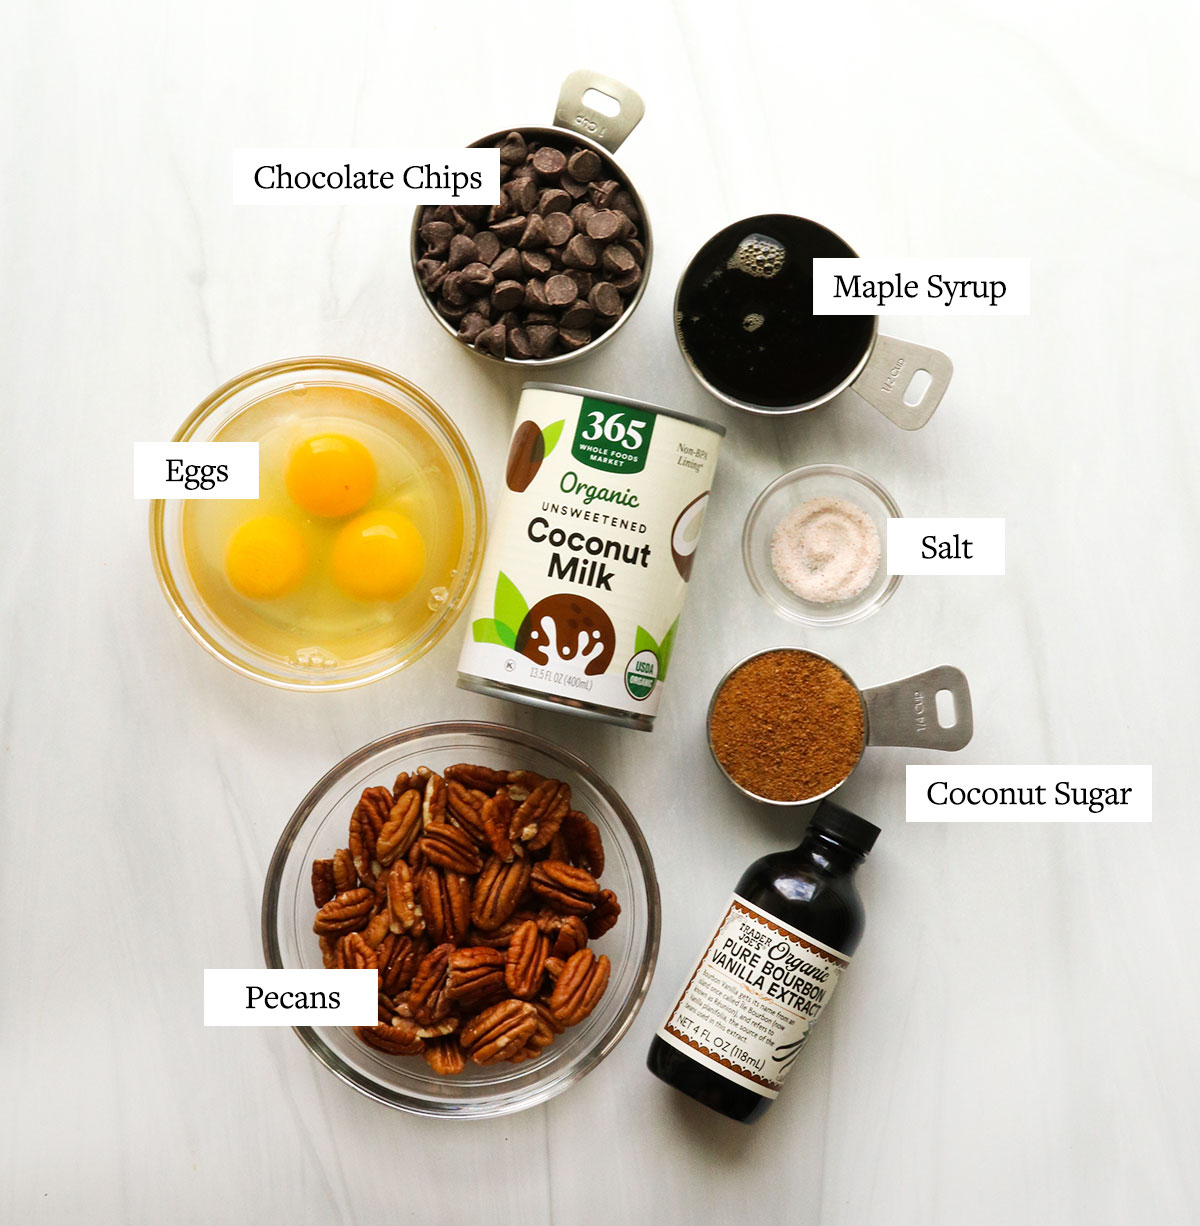 chocolate pecan pie ingredients labeled on a white surface.